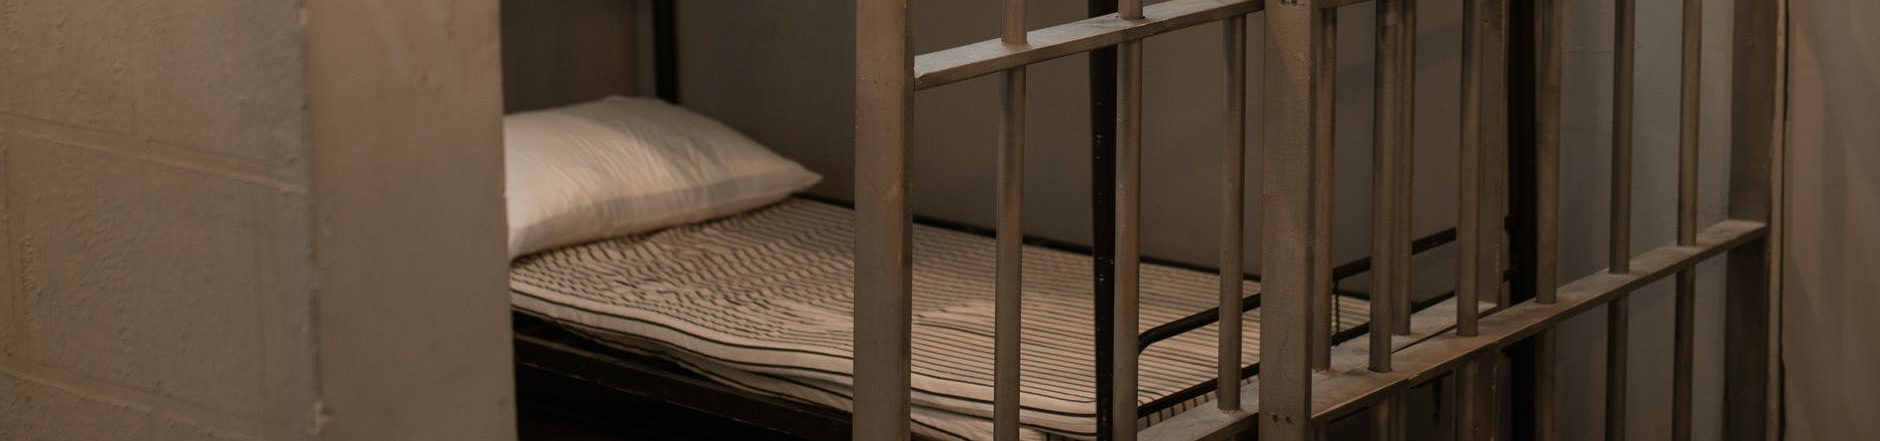 a bunk bed with striped linen behind bars